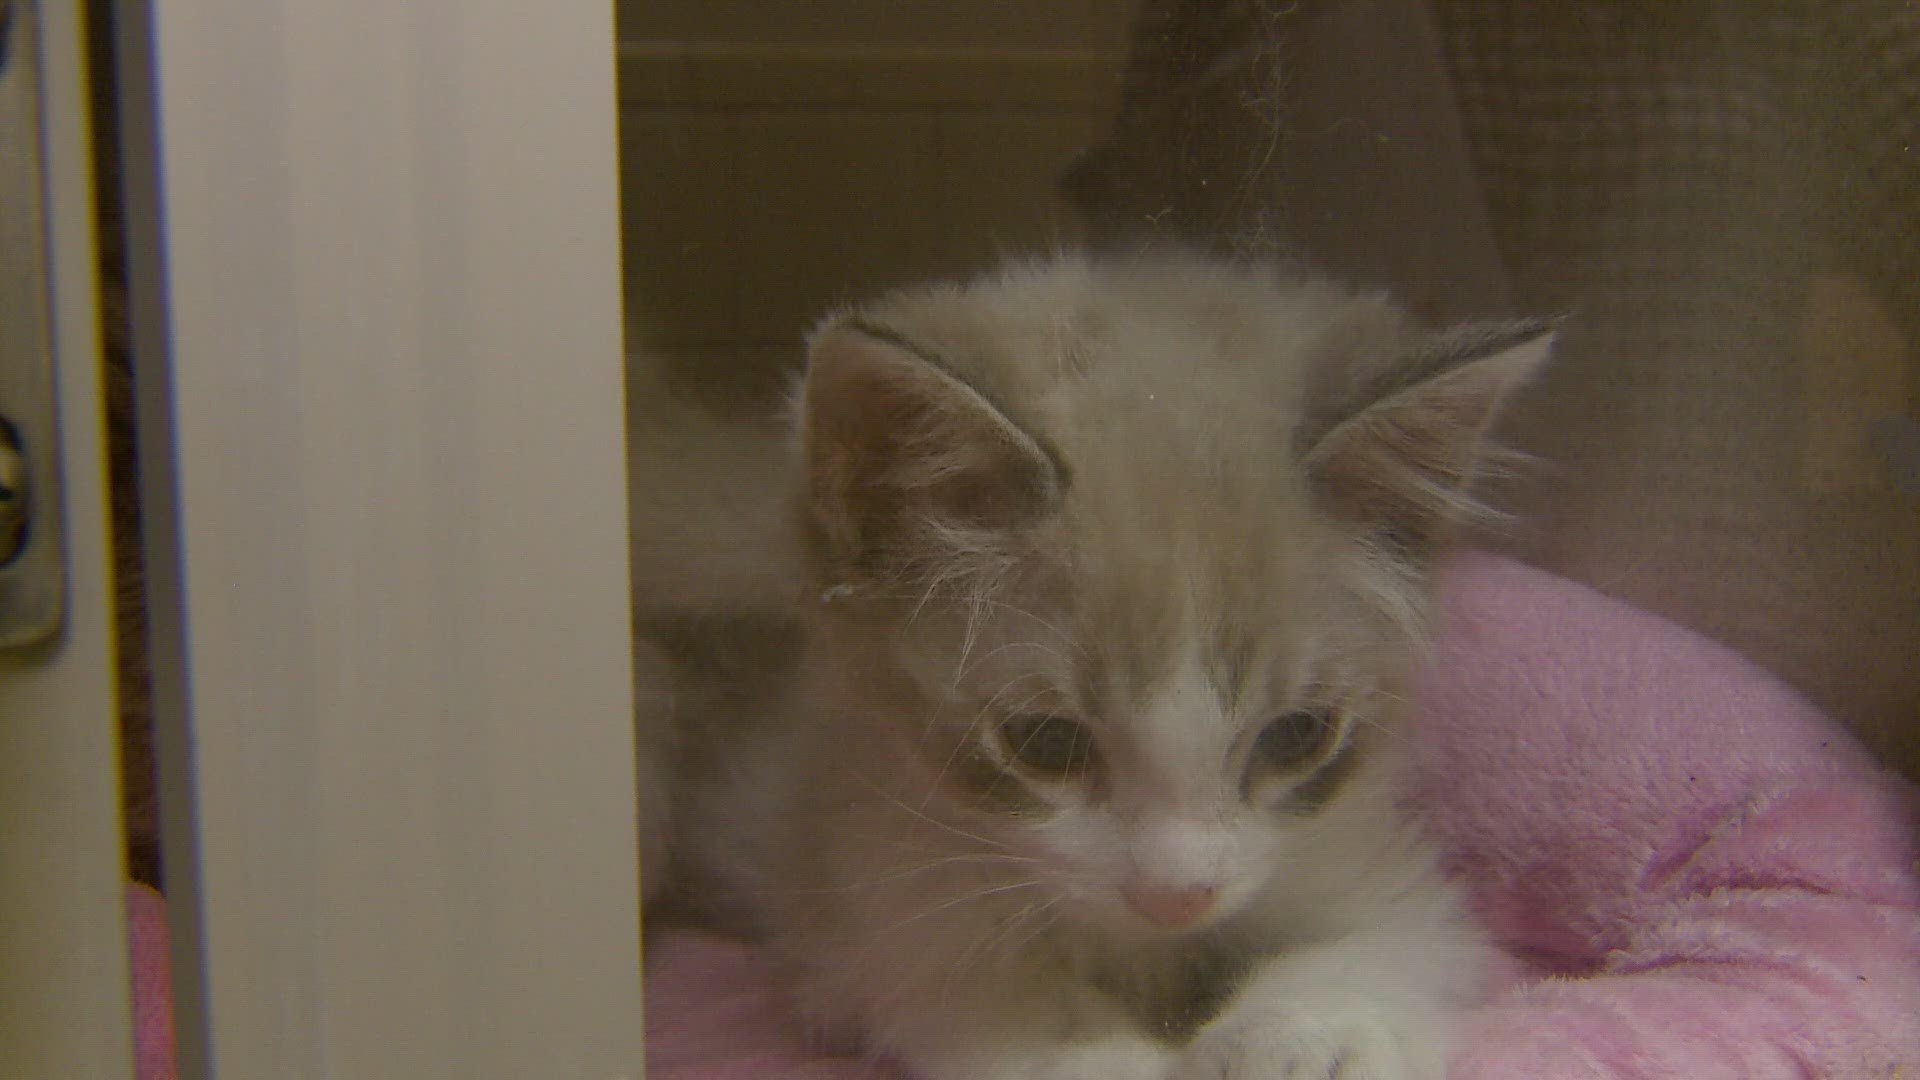 The director of the animal shelter said other shelters have started closing their doors to some animals. Denver Animal Shelter is picking up some of the slack.